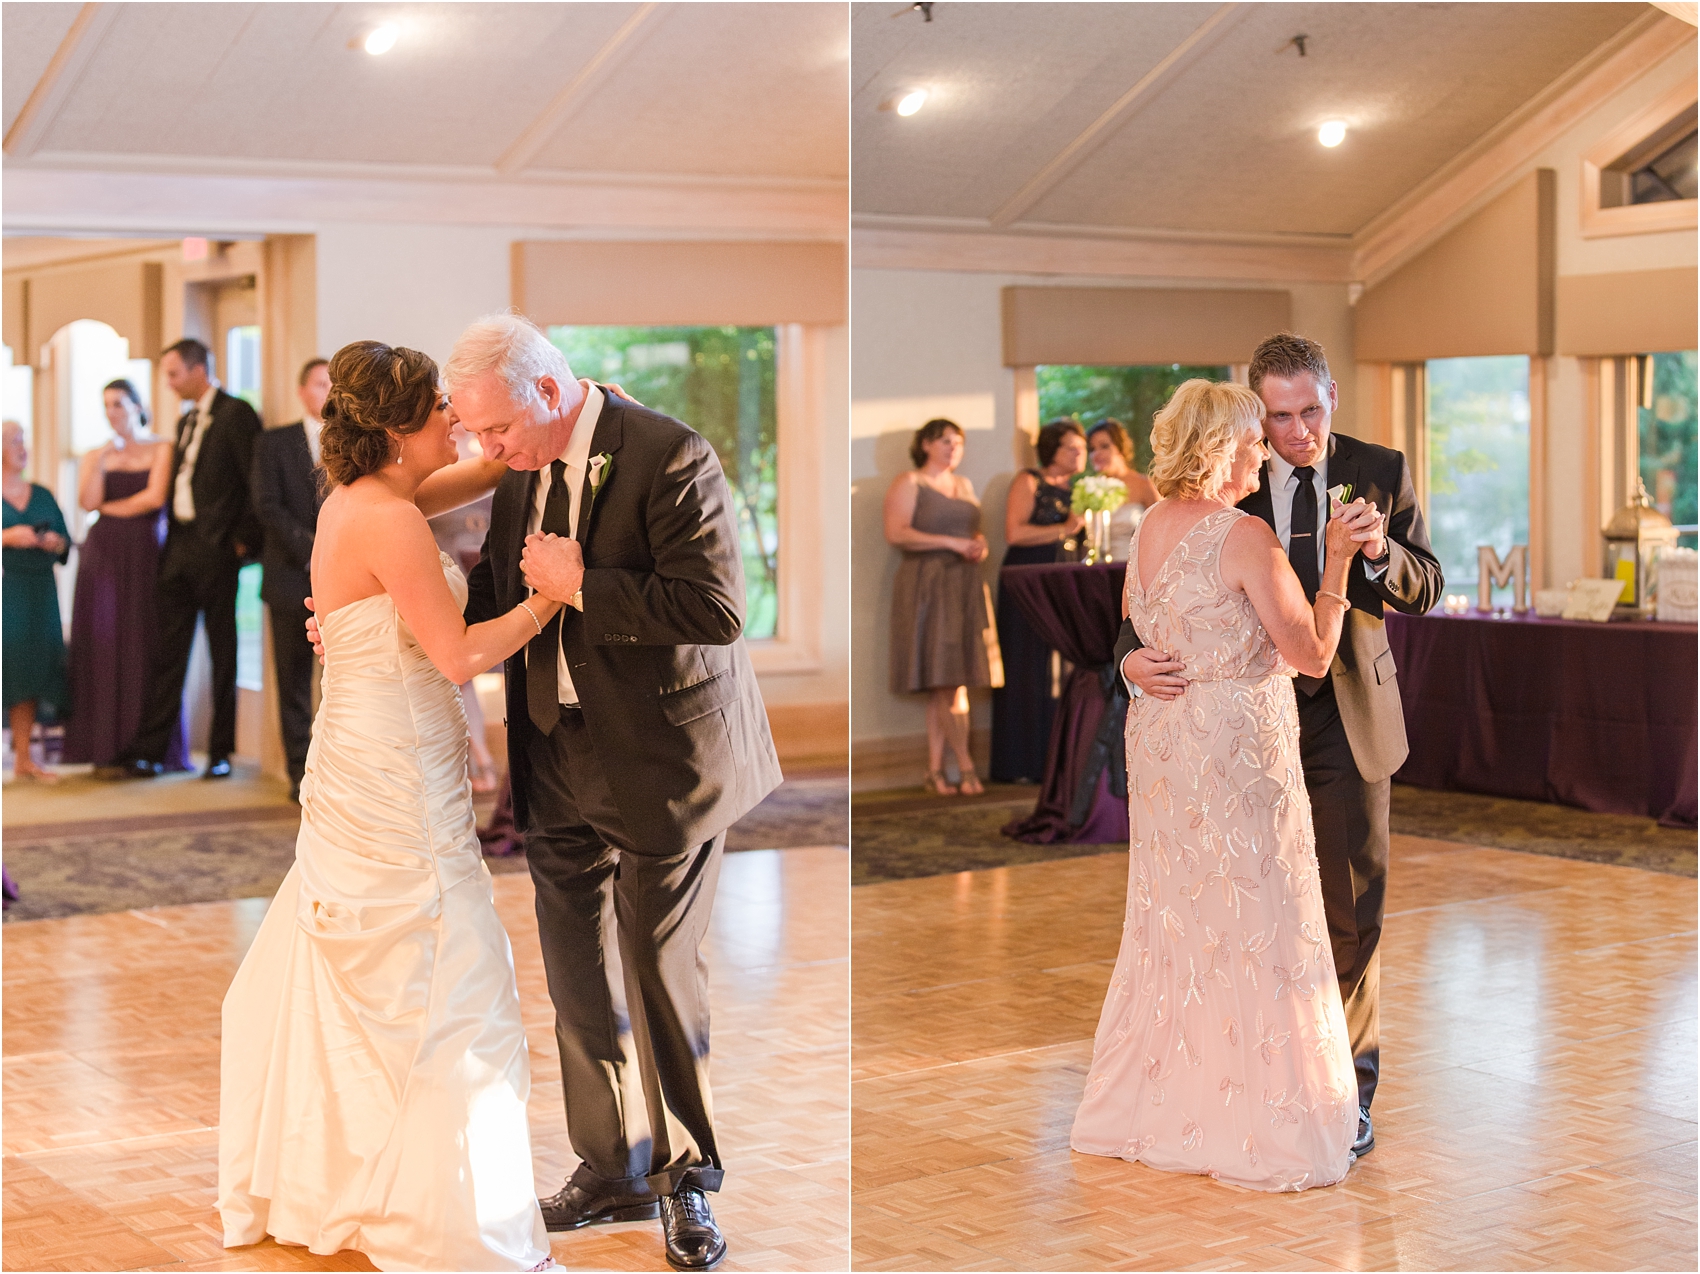 classic-wedding-photos-at-great-oaks-country-club-in-rochester-hills-mi-by-courtney-carolyn-photography_0108.jpg